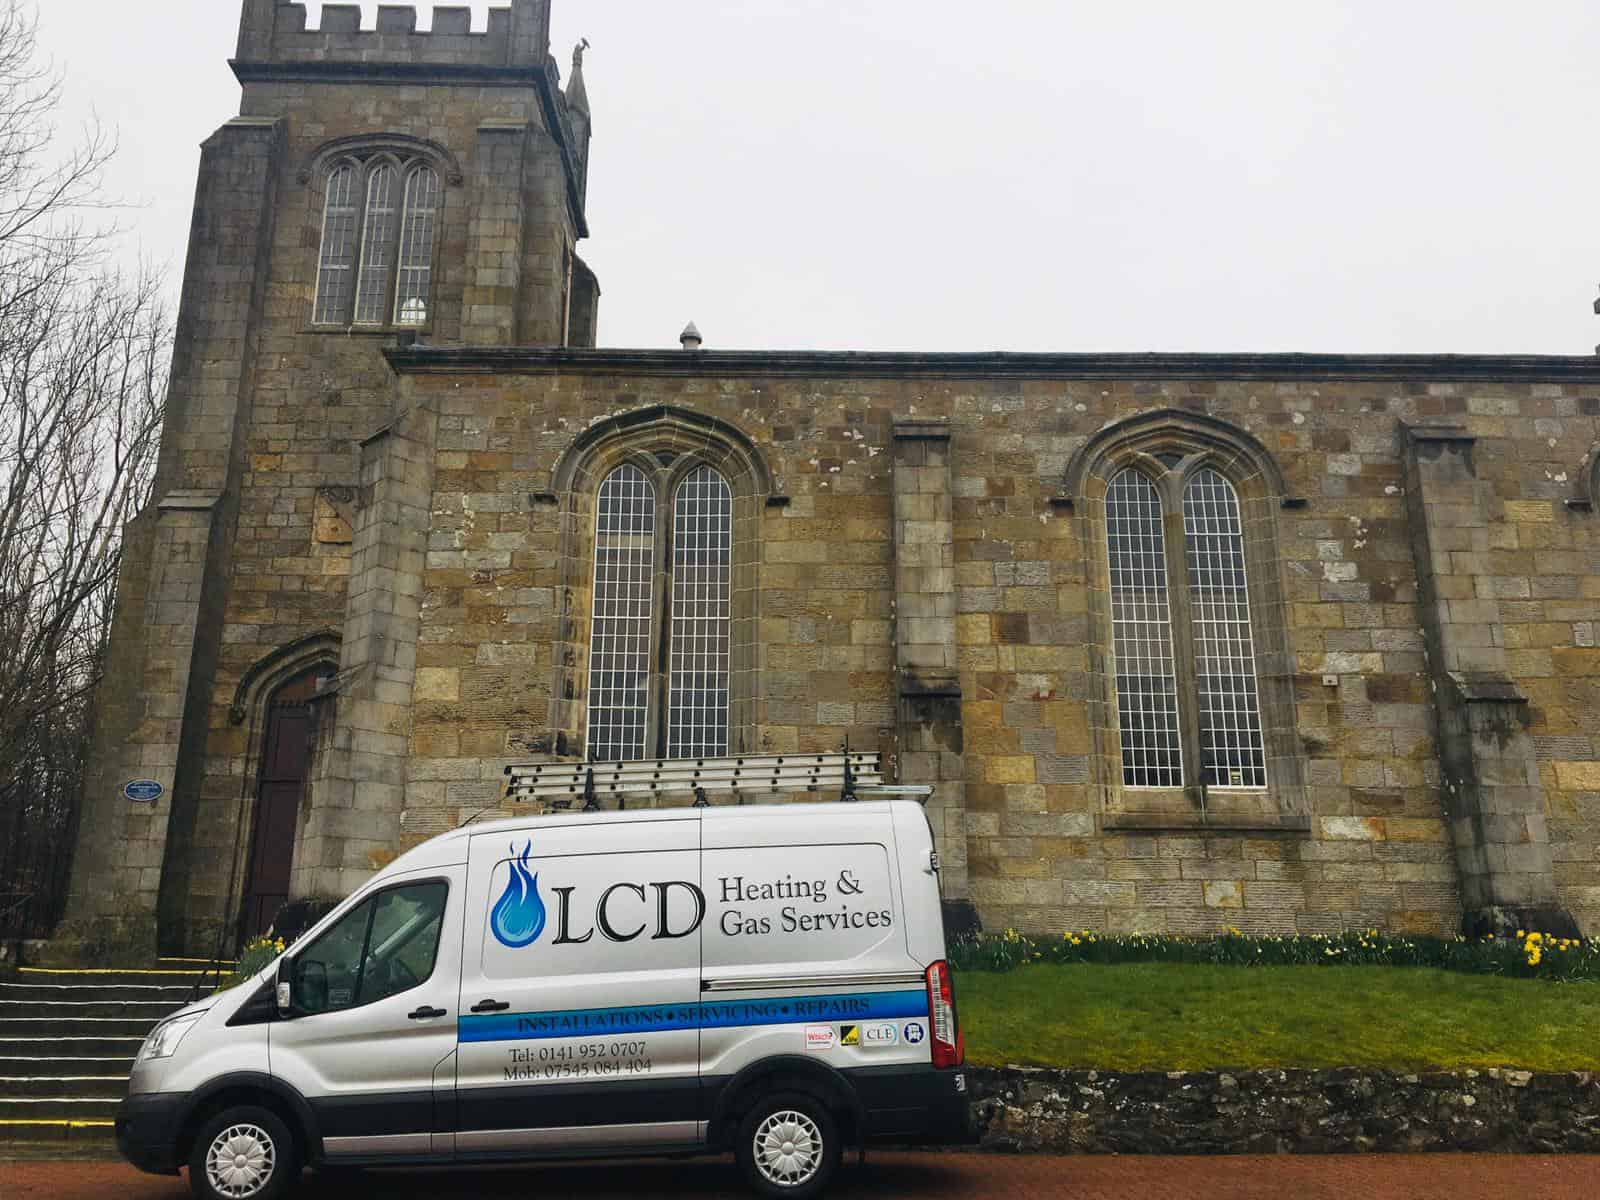 LCD Heating & Gas Services Clydebank Gallery 91